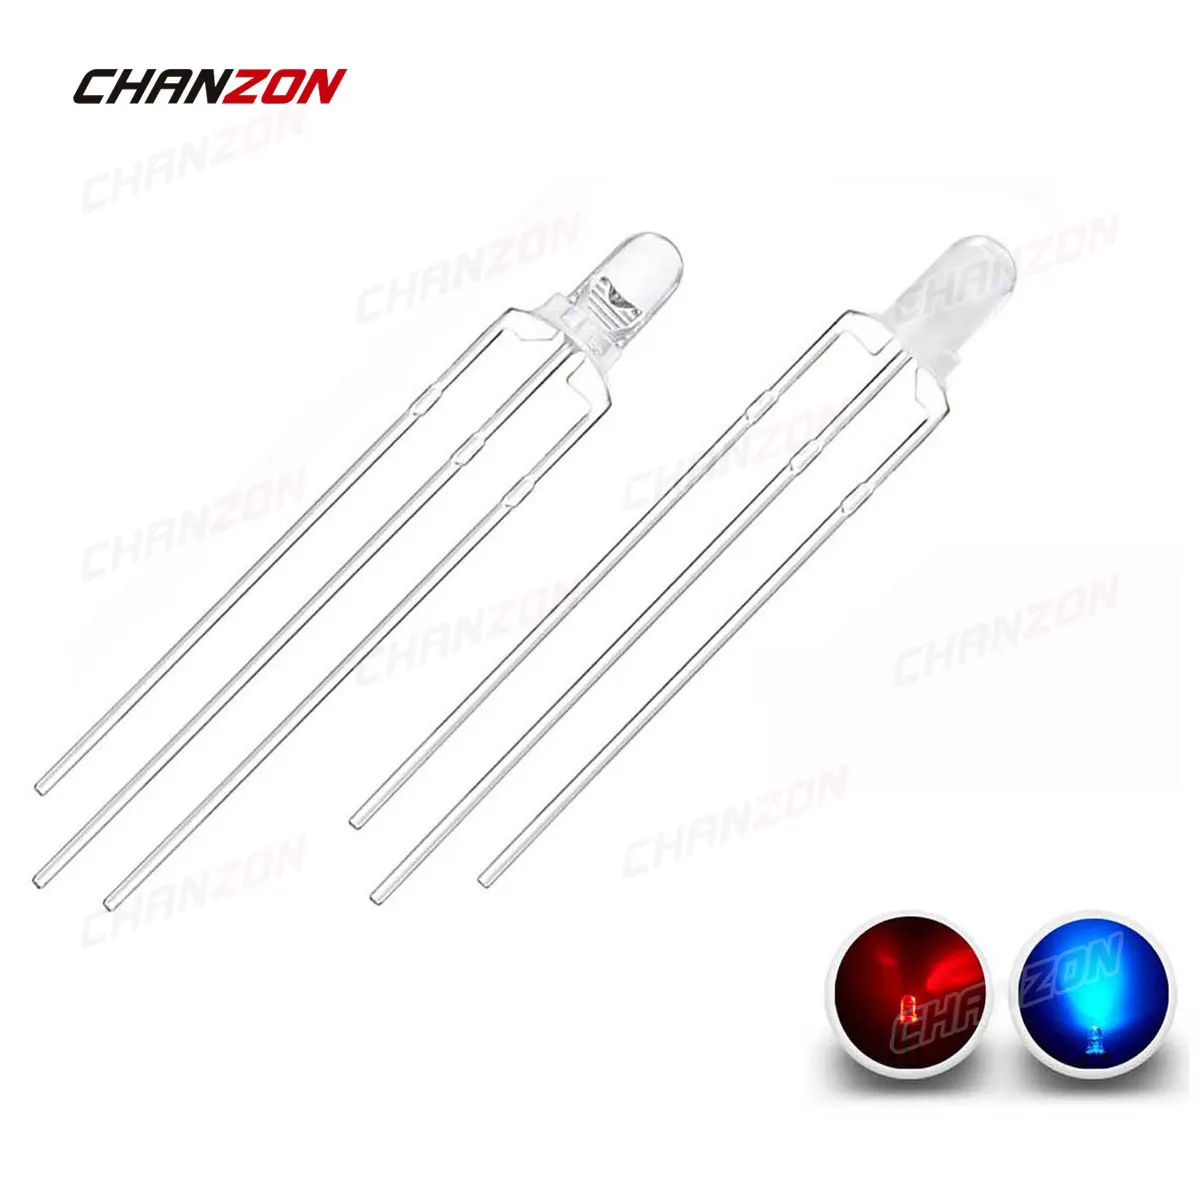 100pcs 3mm Red Blue Bicolor LED Diode Common Anode Cathode Round Lens DIY DIP 3V 3pin Dual Color Lamp 3 mm Light Emitting Diode